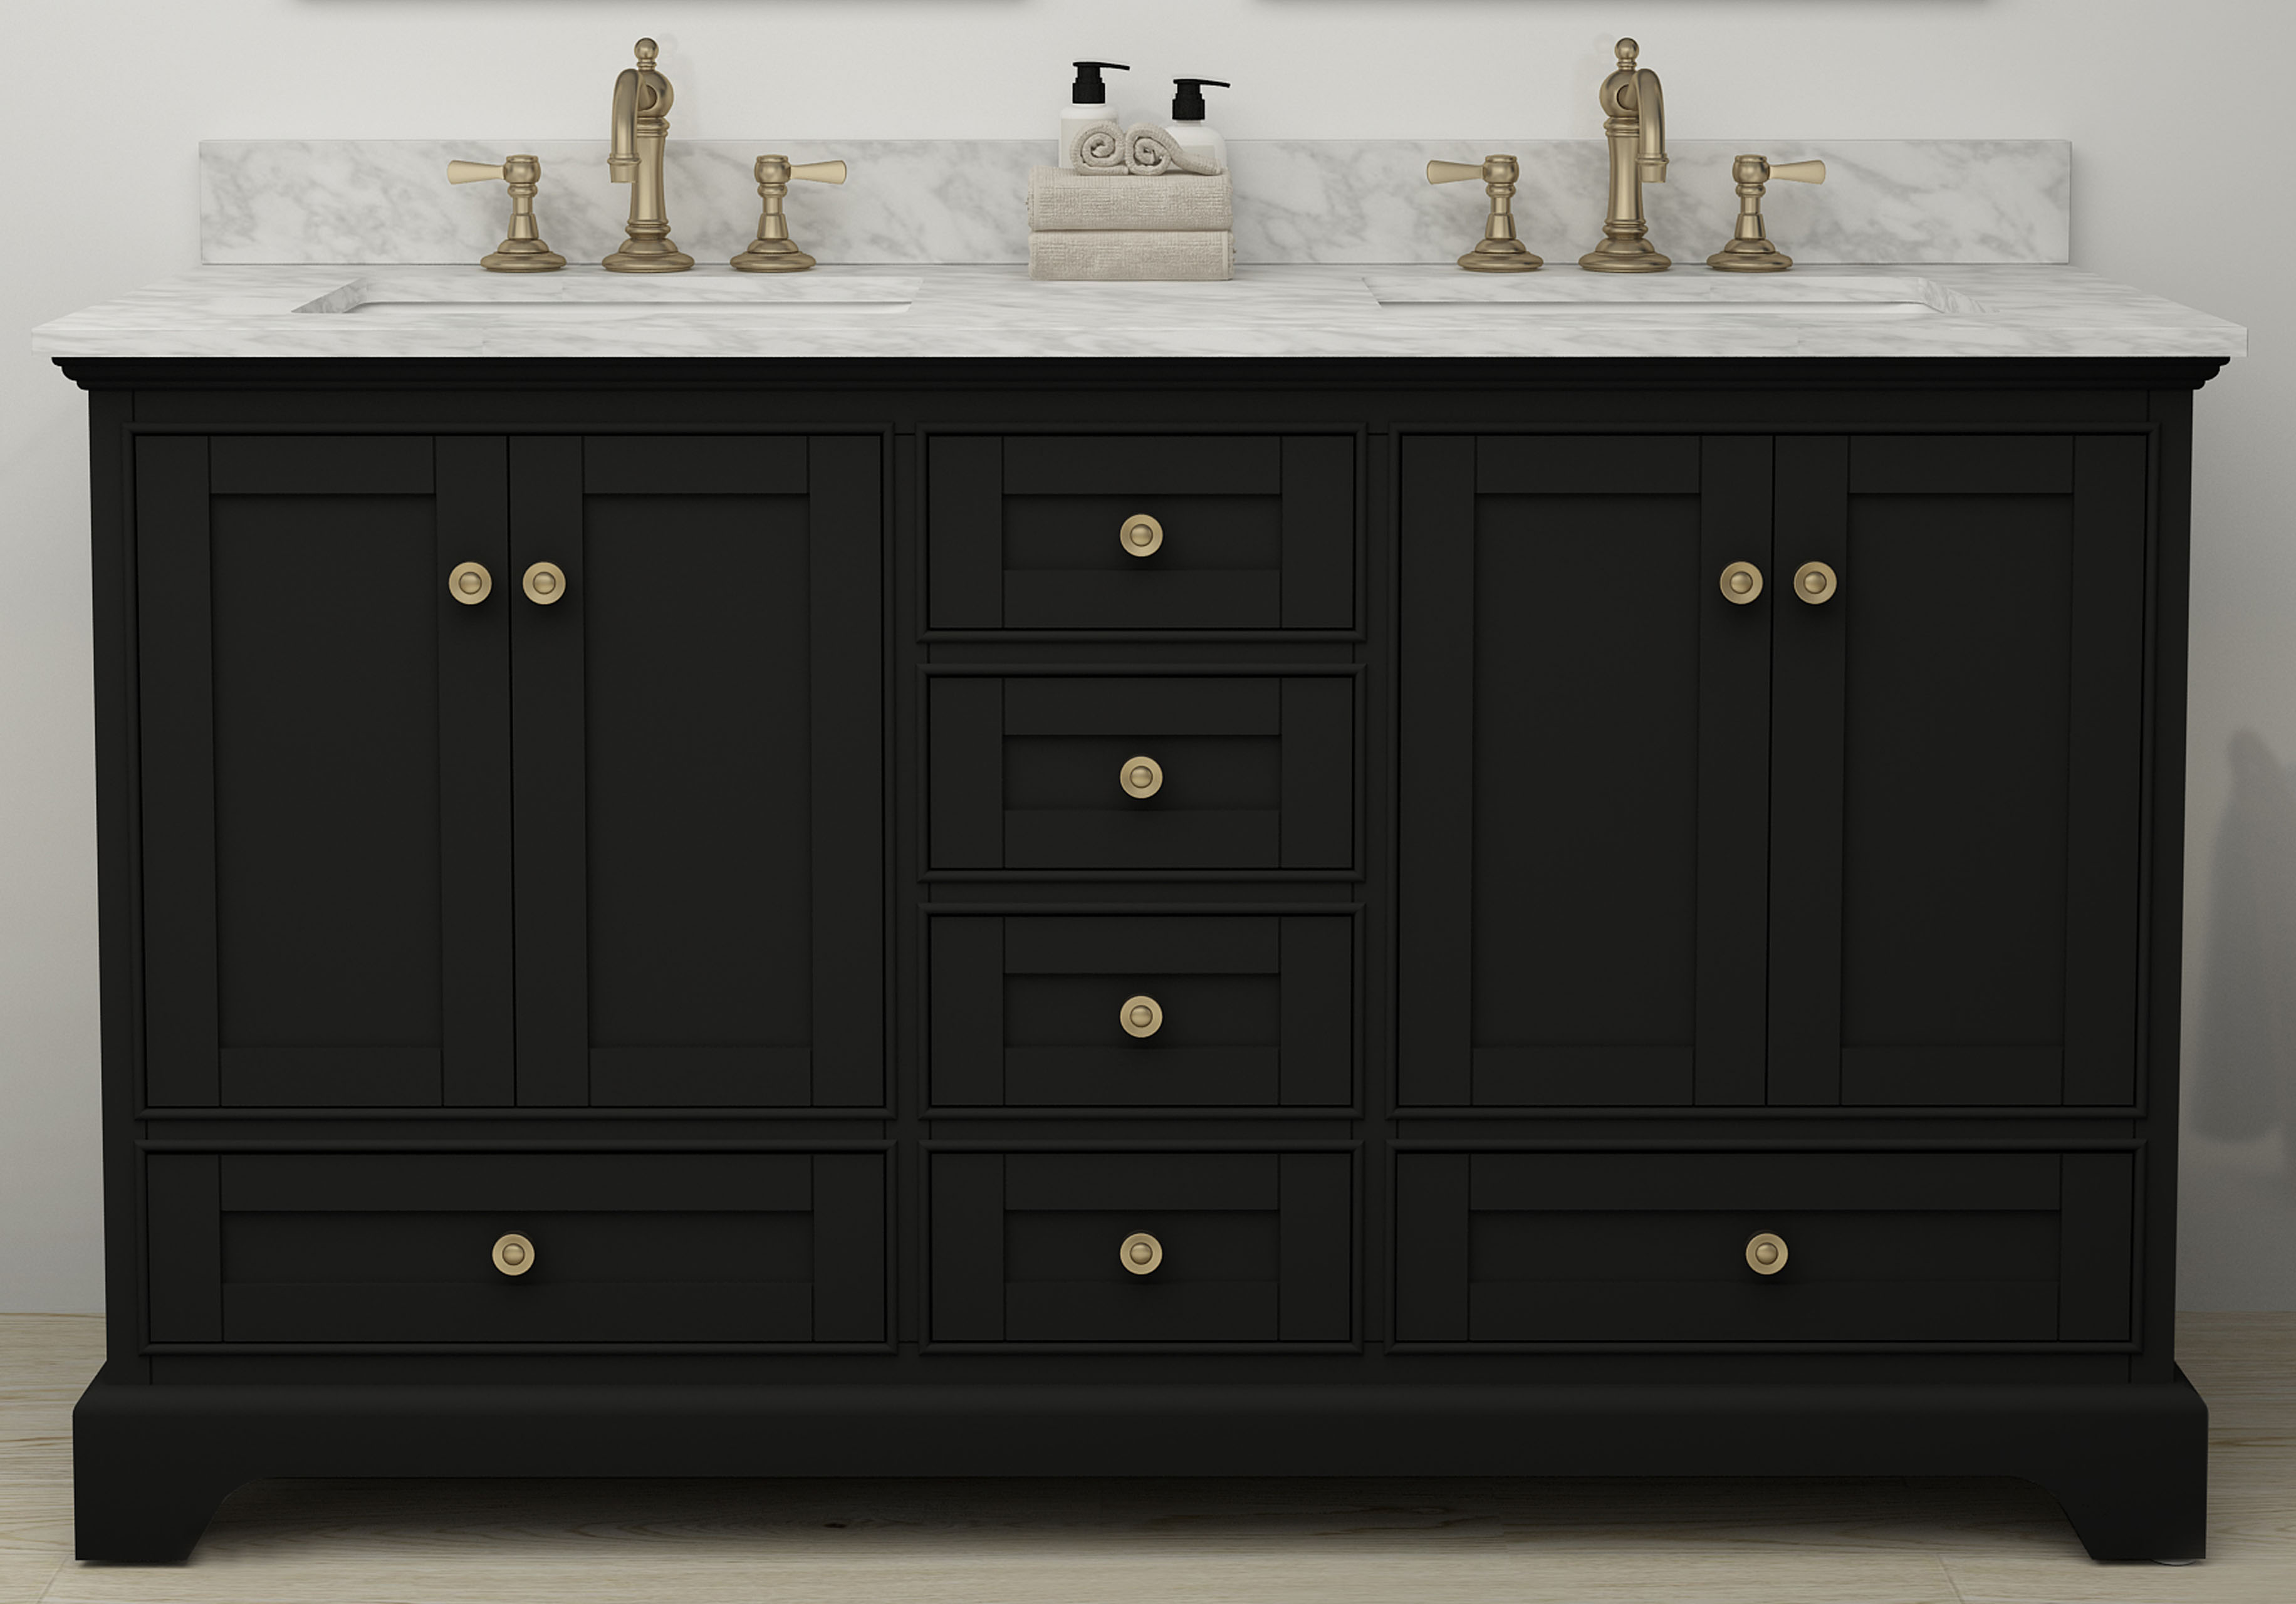 60" Bath Vanity Set in Black Onyx with Italian Carrara White Marble Vanity top and White Undermount Basin with Gold Hardware with Color and Mirror Options